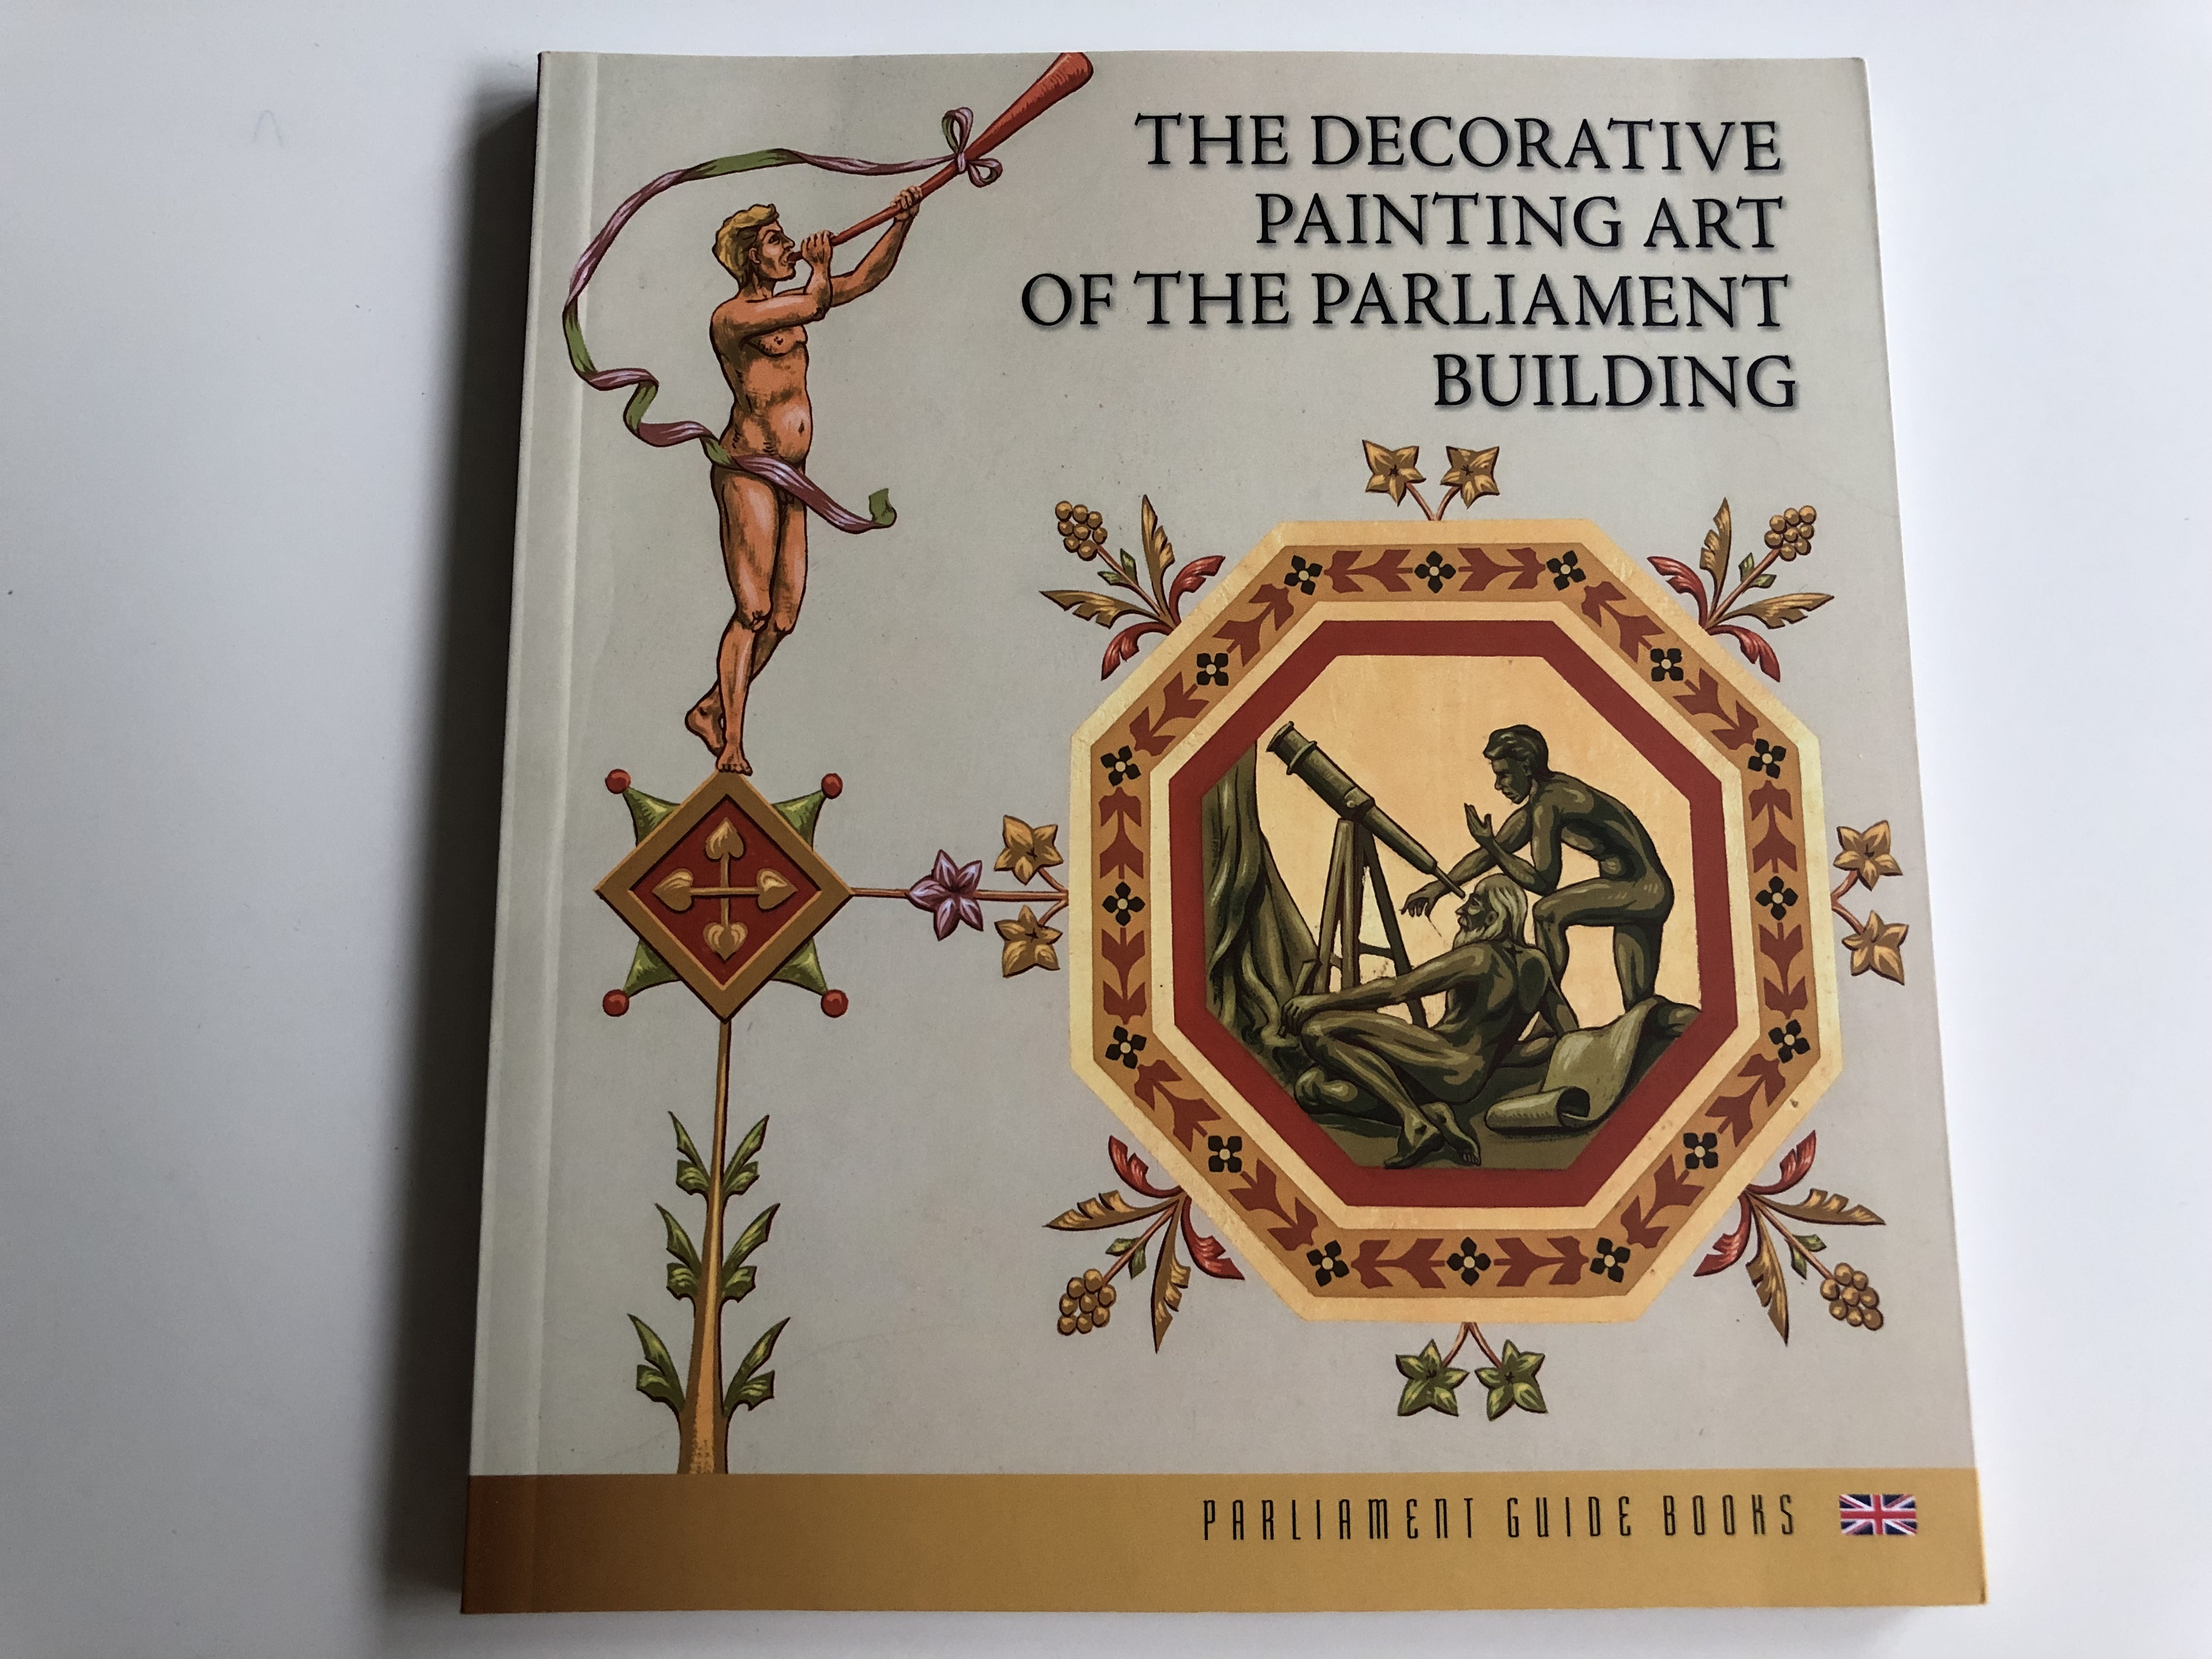 the-decorative-painting-art-of-the-parliament-building-by-zsuzs-kapit-ny-horv-th-parliament-guide-books-orsz-gh-z-k-nyvkiad-2018-1-.jpg